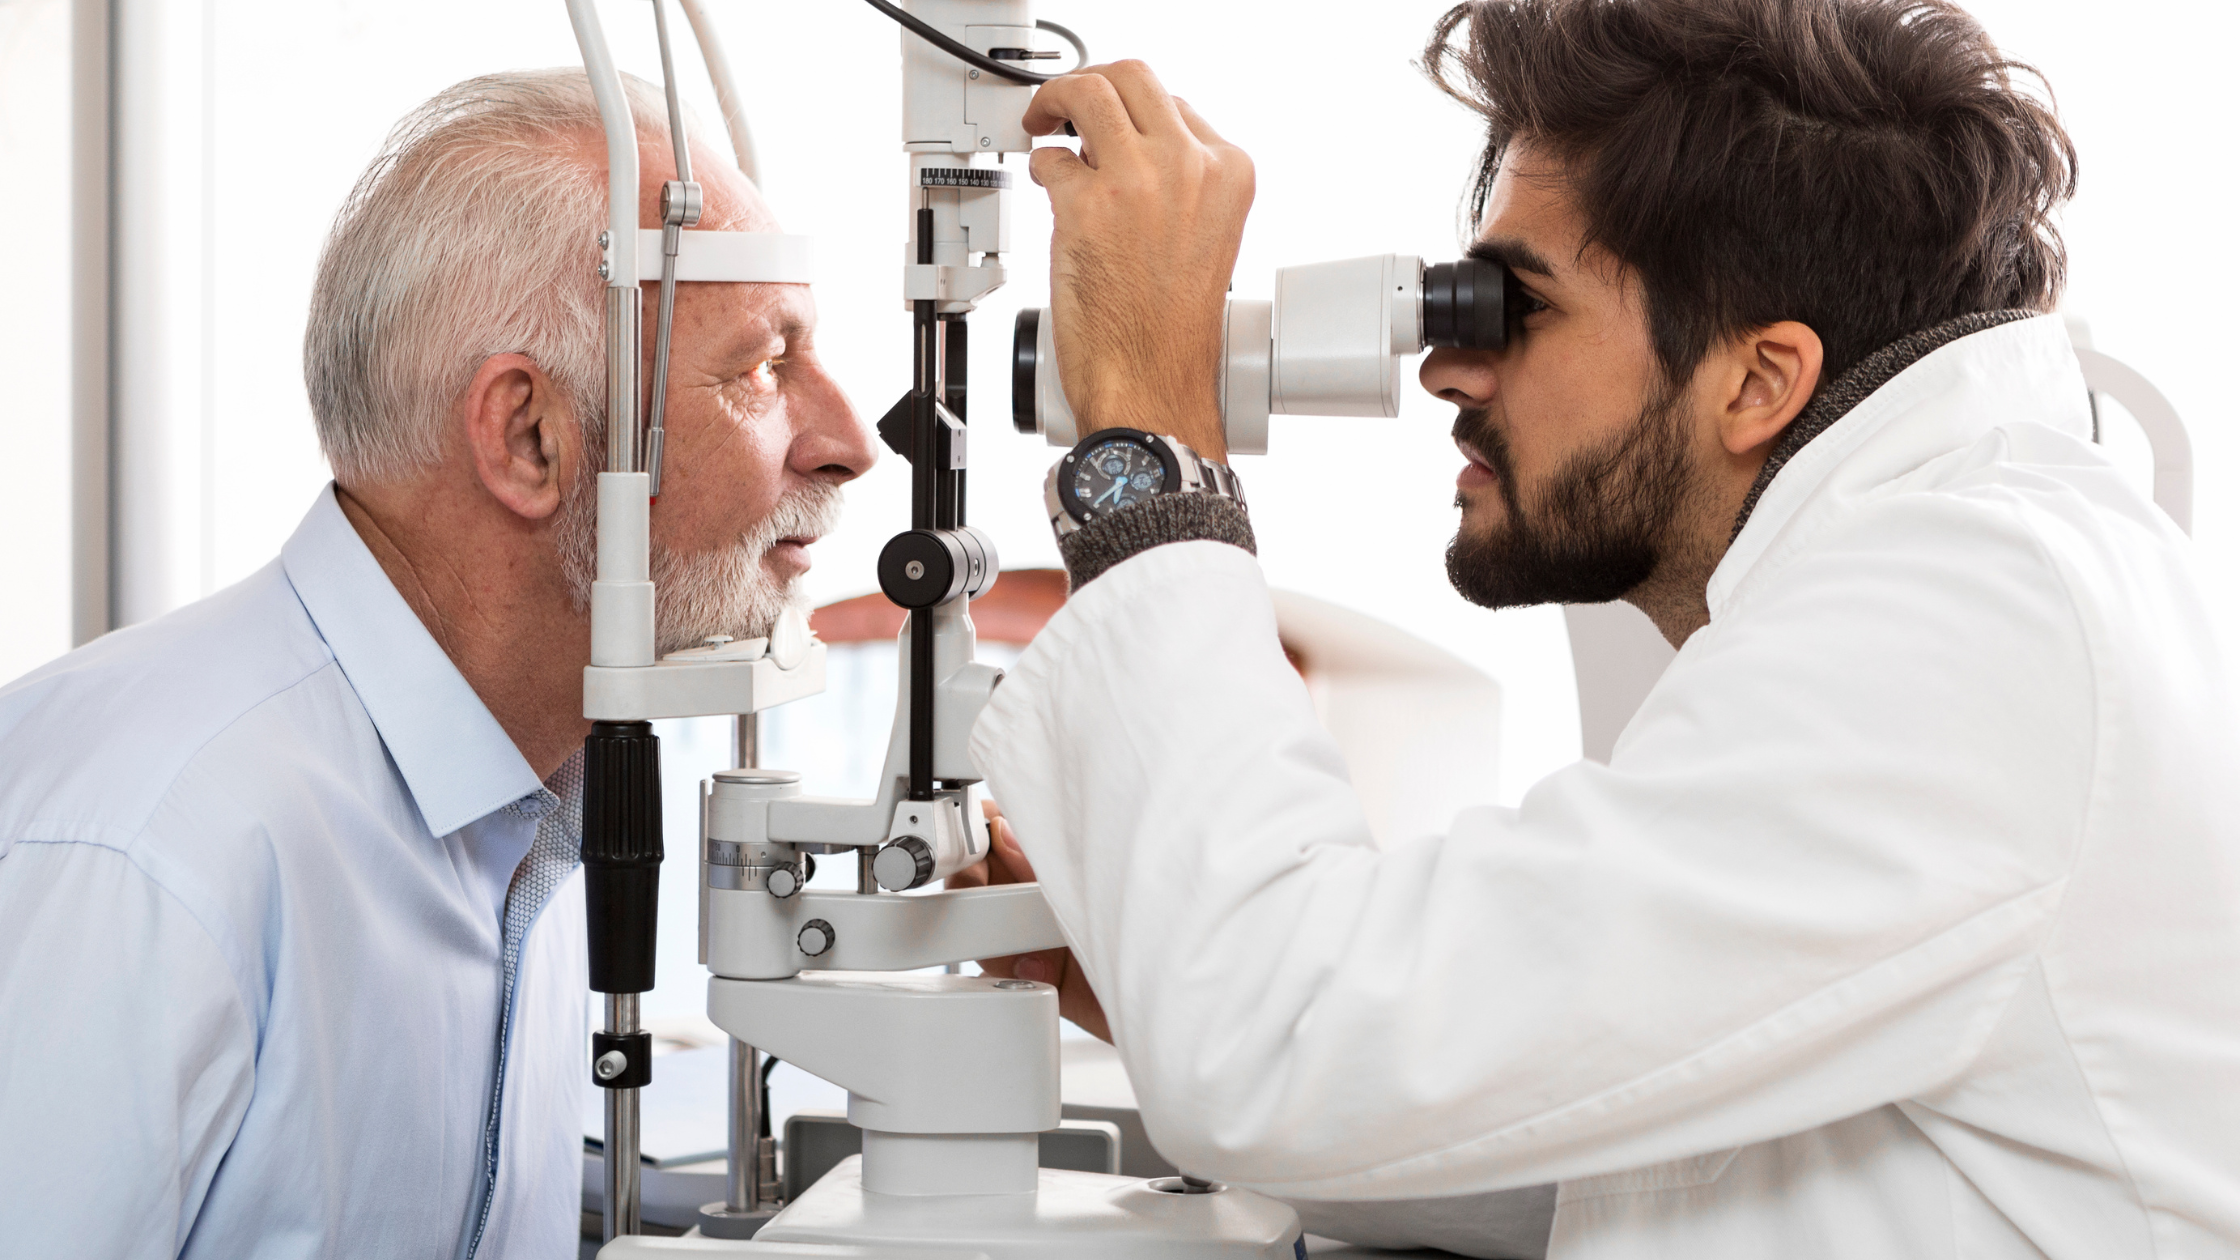 Have you taken a glaucoma test?